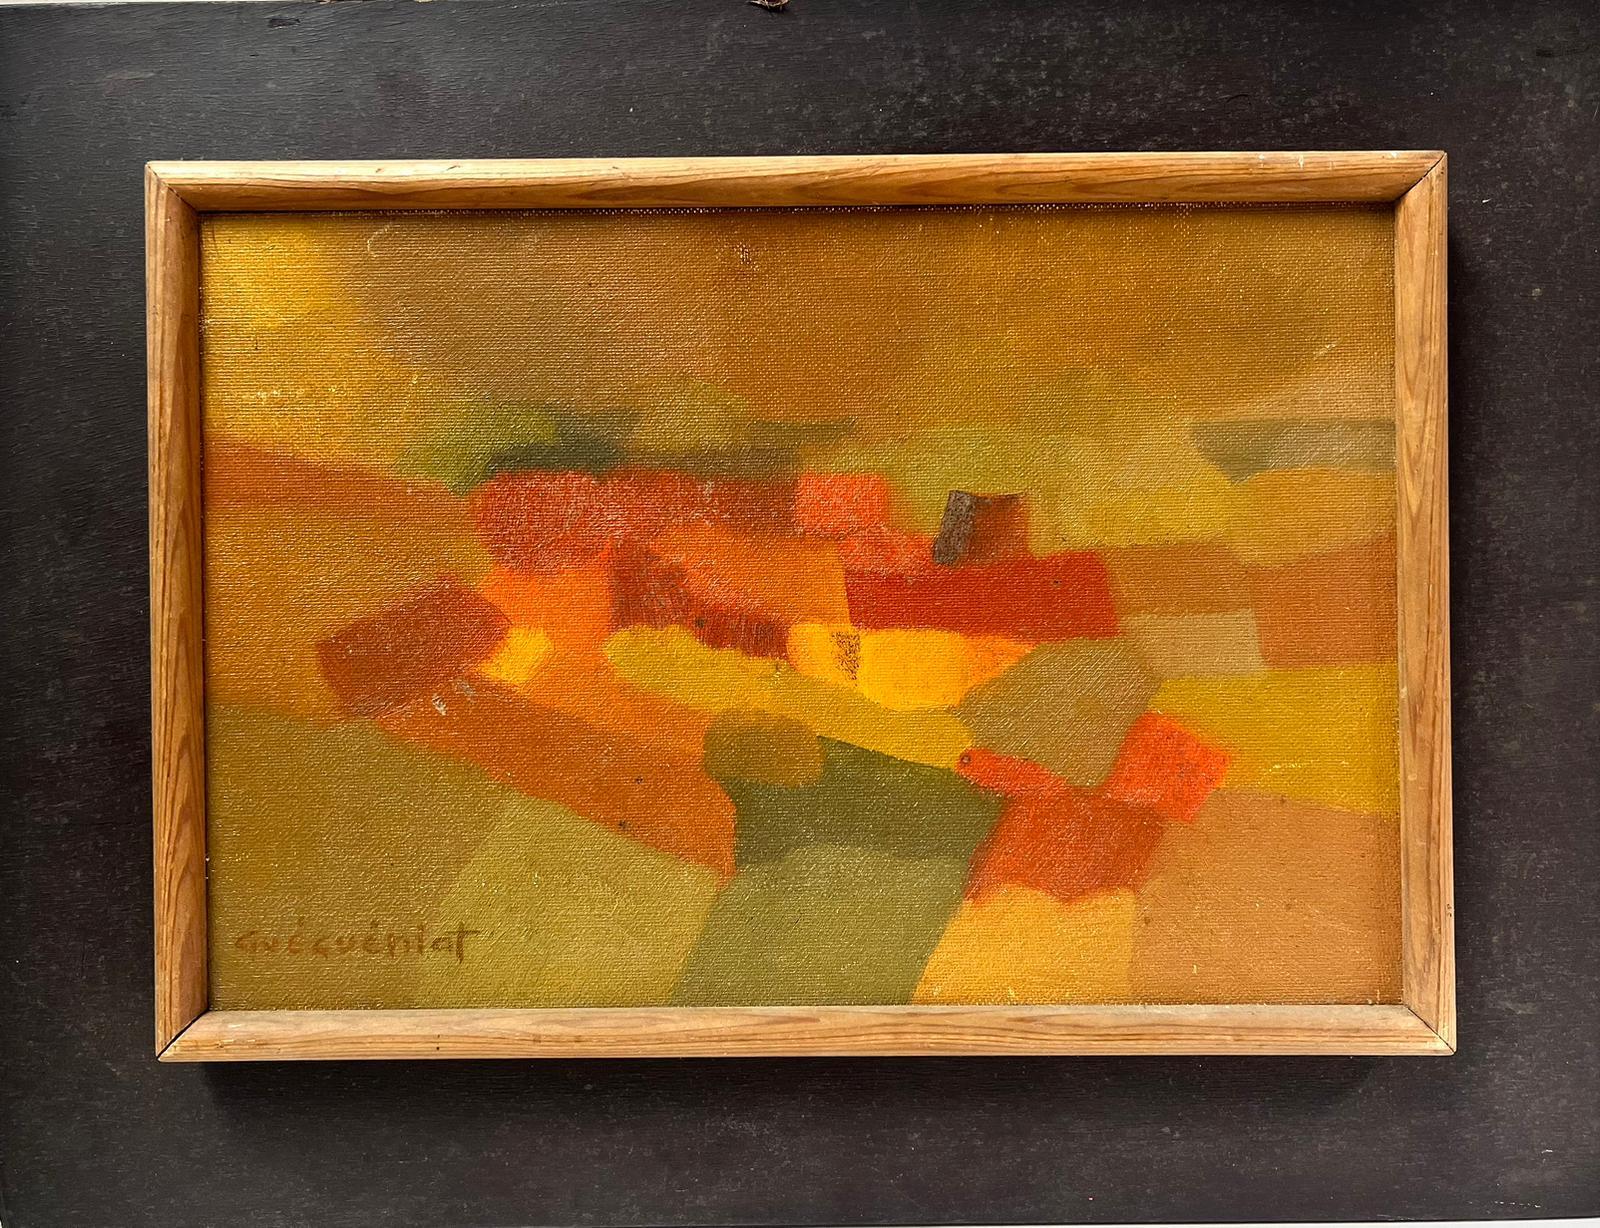 French cubist artist, circa 1950's
signed oil painting on board, stuck on board
board: 14 x 18 inches
painting: 9.5 x 14 inches
provenance: private collection, France
condition: very good and sound condition 
